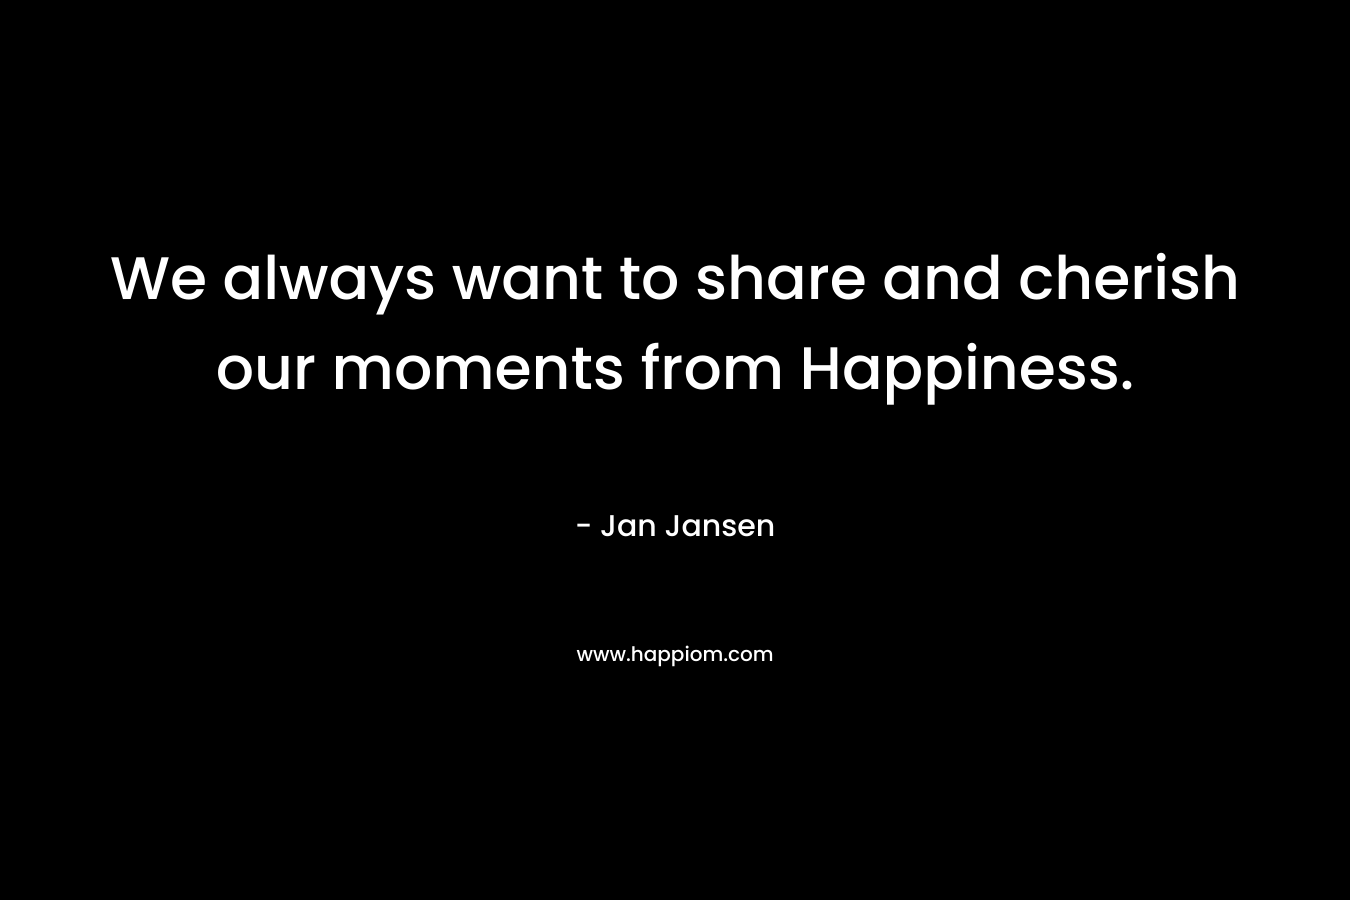 We always want to share and cherish our moments from Happiness.